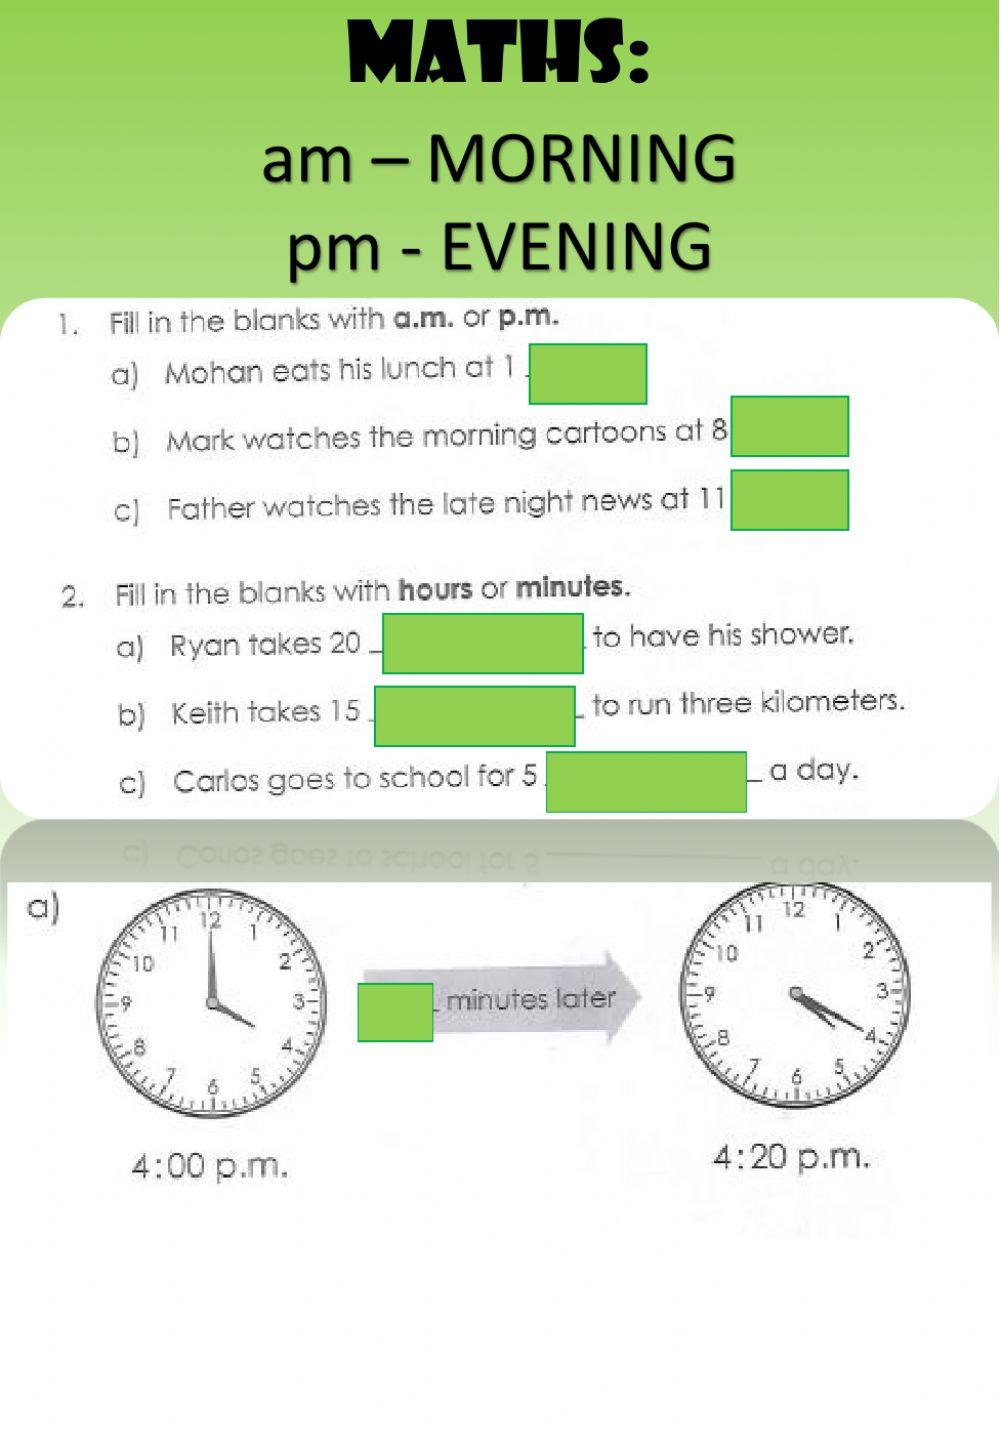 WEEK 18: THURSDAY: Telling Time (AM-PM)